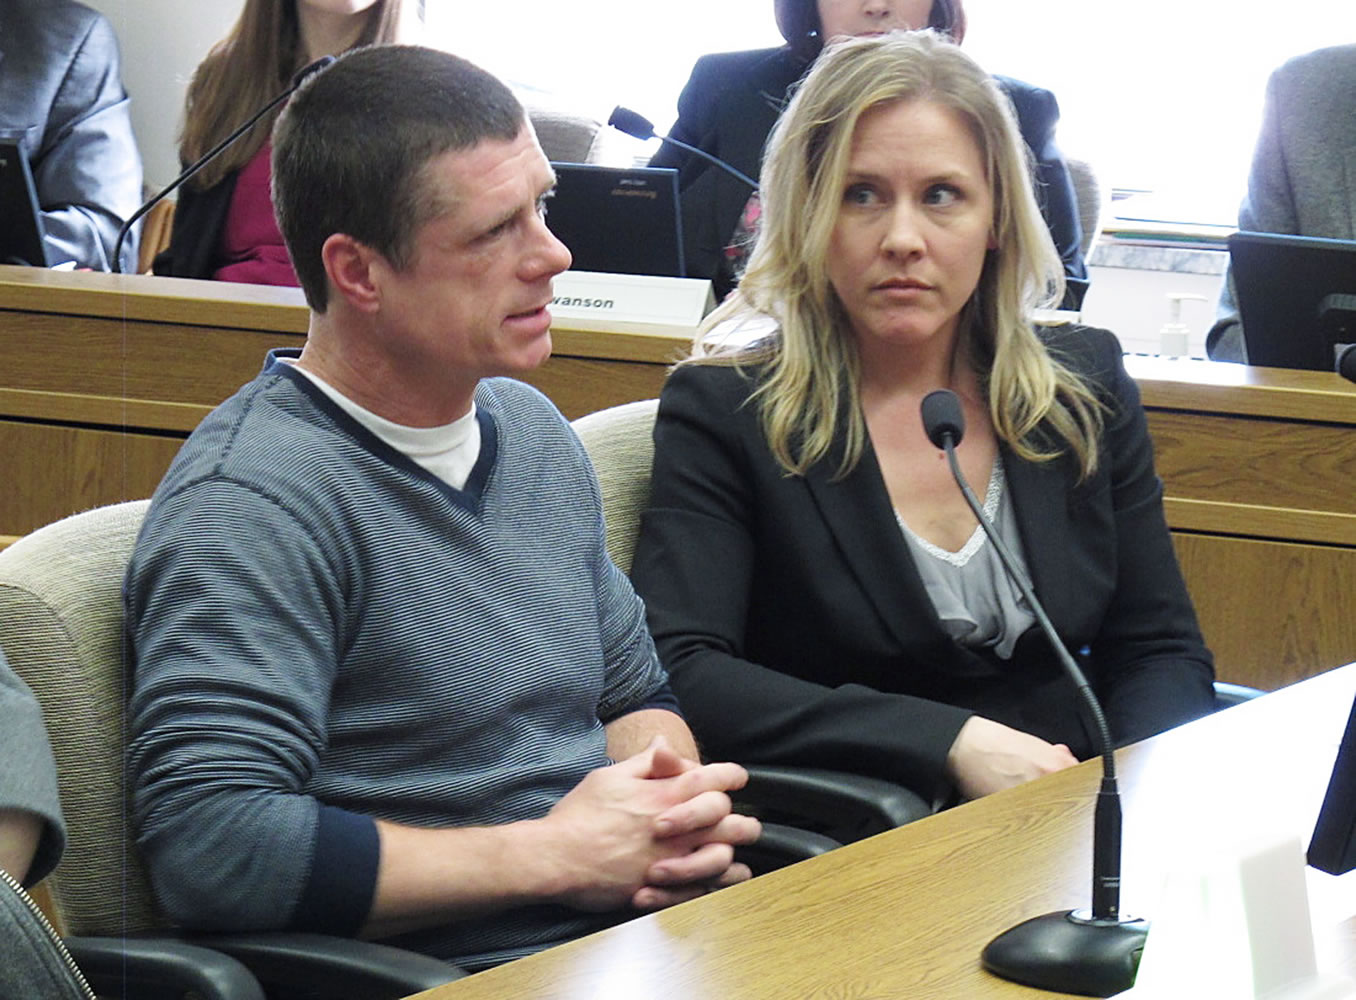 Alan Northrop, left, testifies before the Senate Law and Justice Committee in Olympia as Lara Zarowsky, right, of the Innocence Project Northwest, looks on.